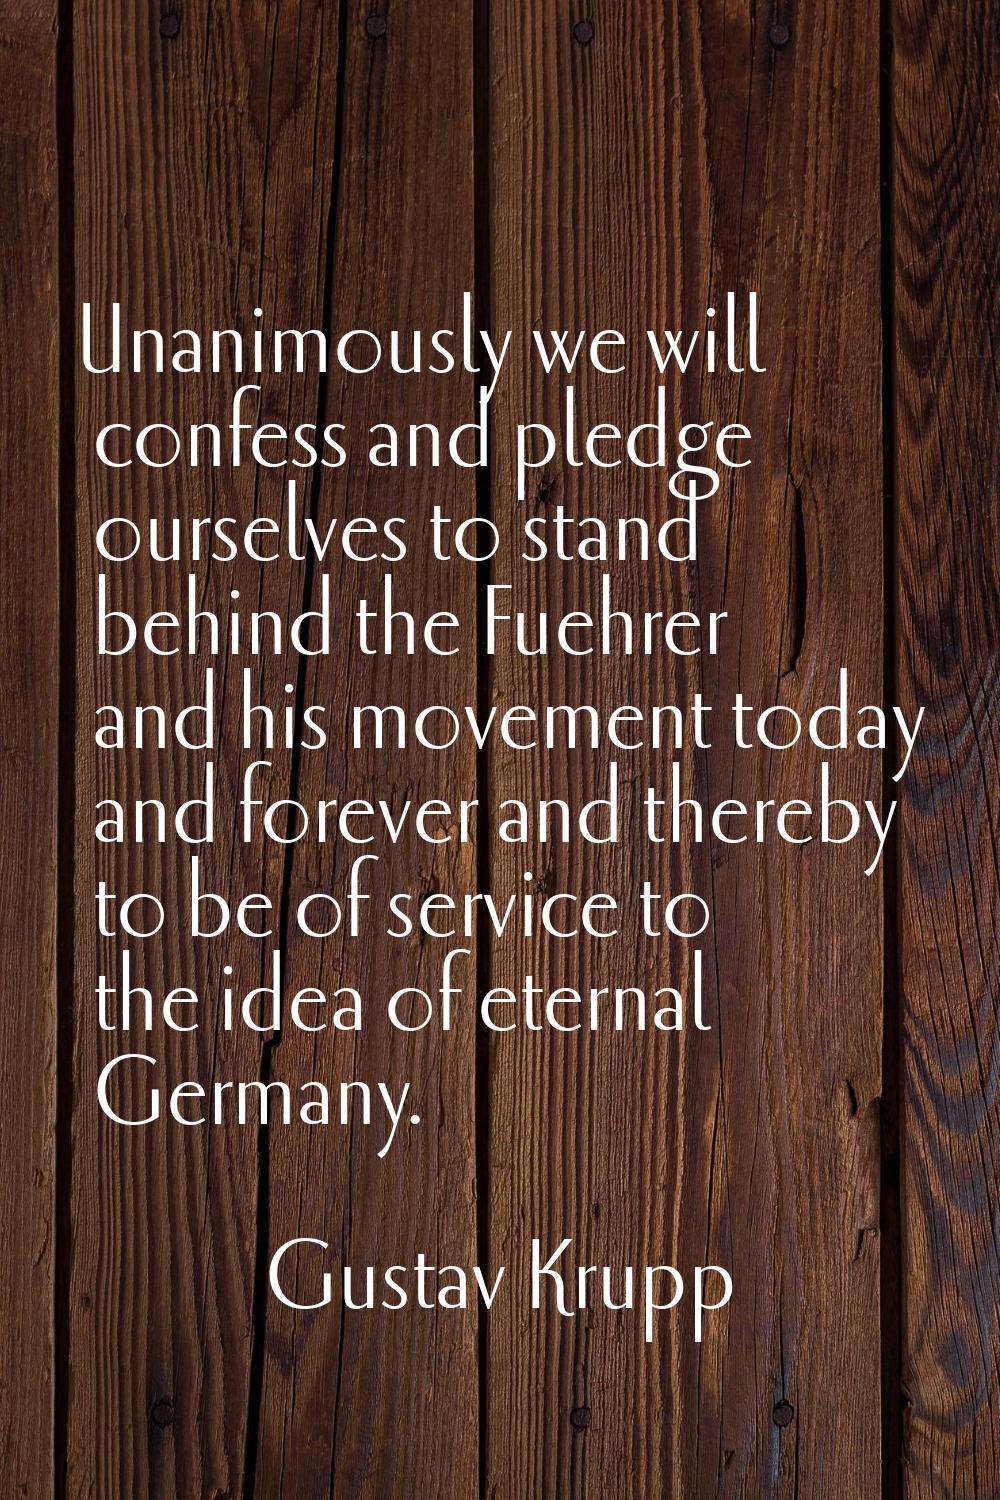 Unanimously we will confess and pledge ourselves to stand behind the Fuehrer and his movement today